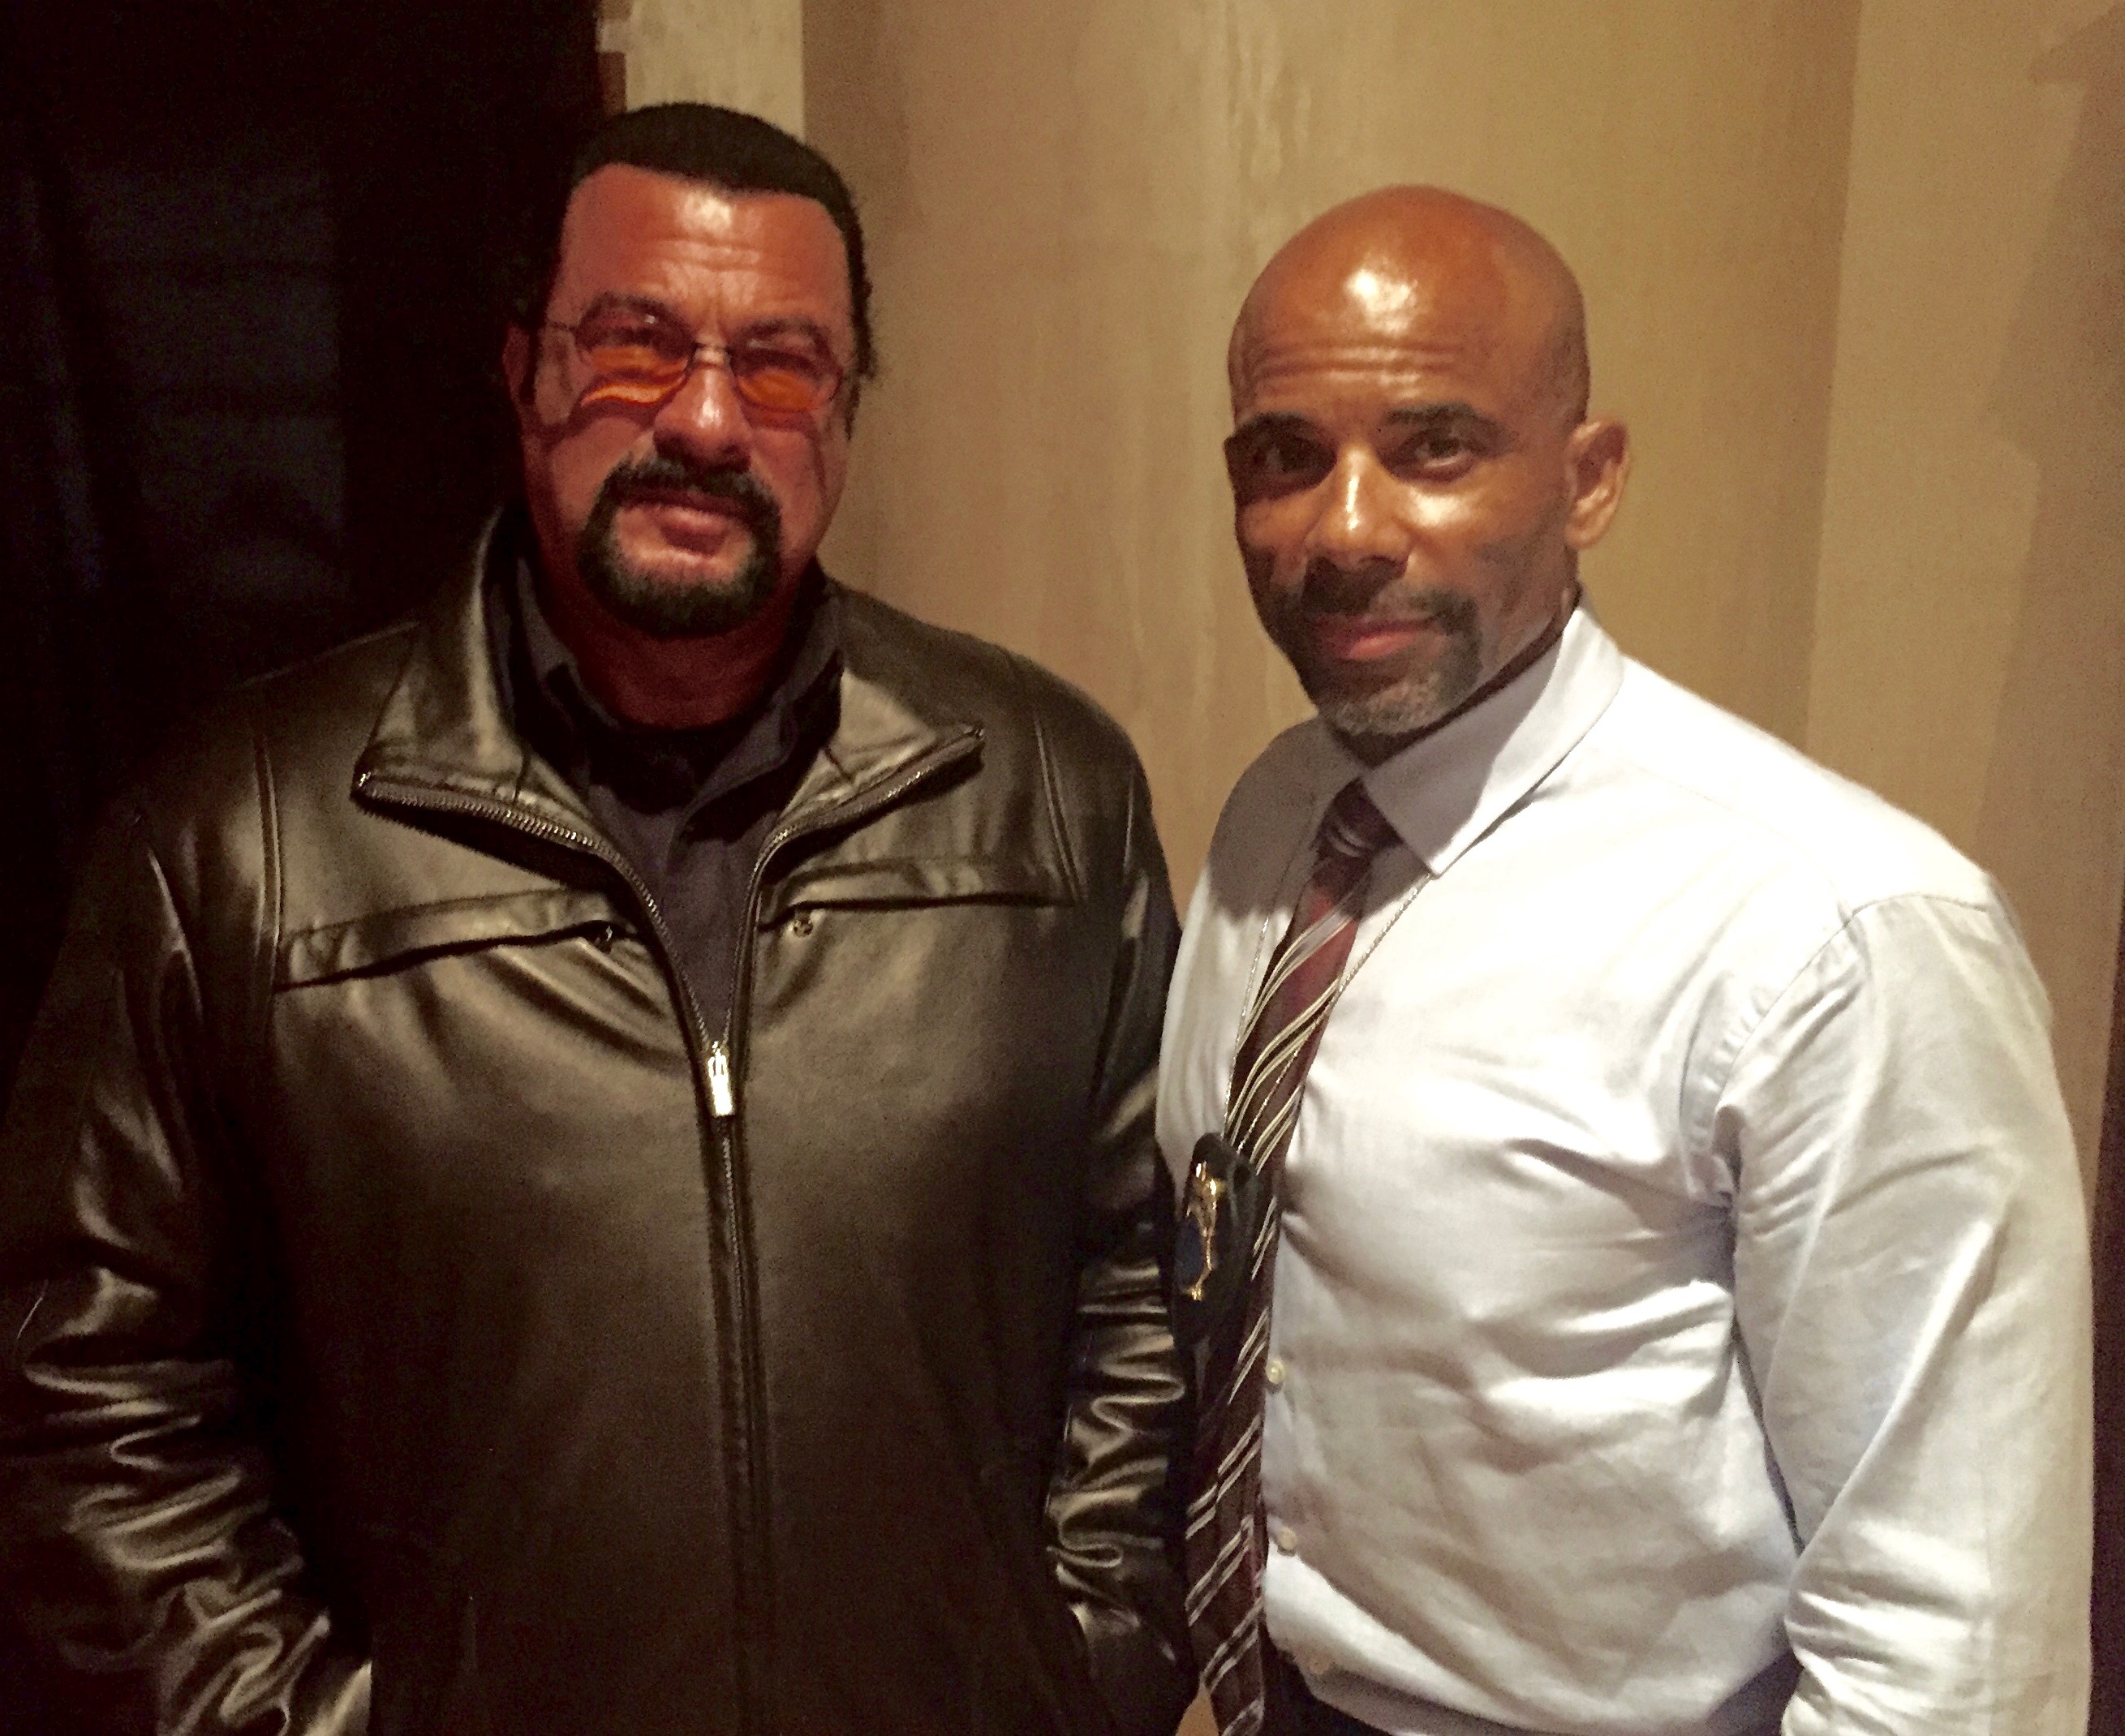 Latest Release: Killing Salazar with Steven Seagal